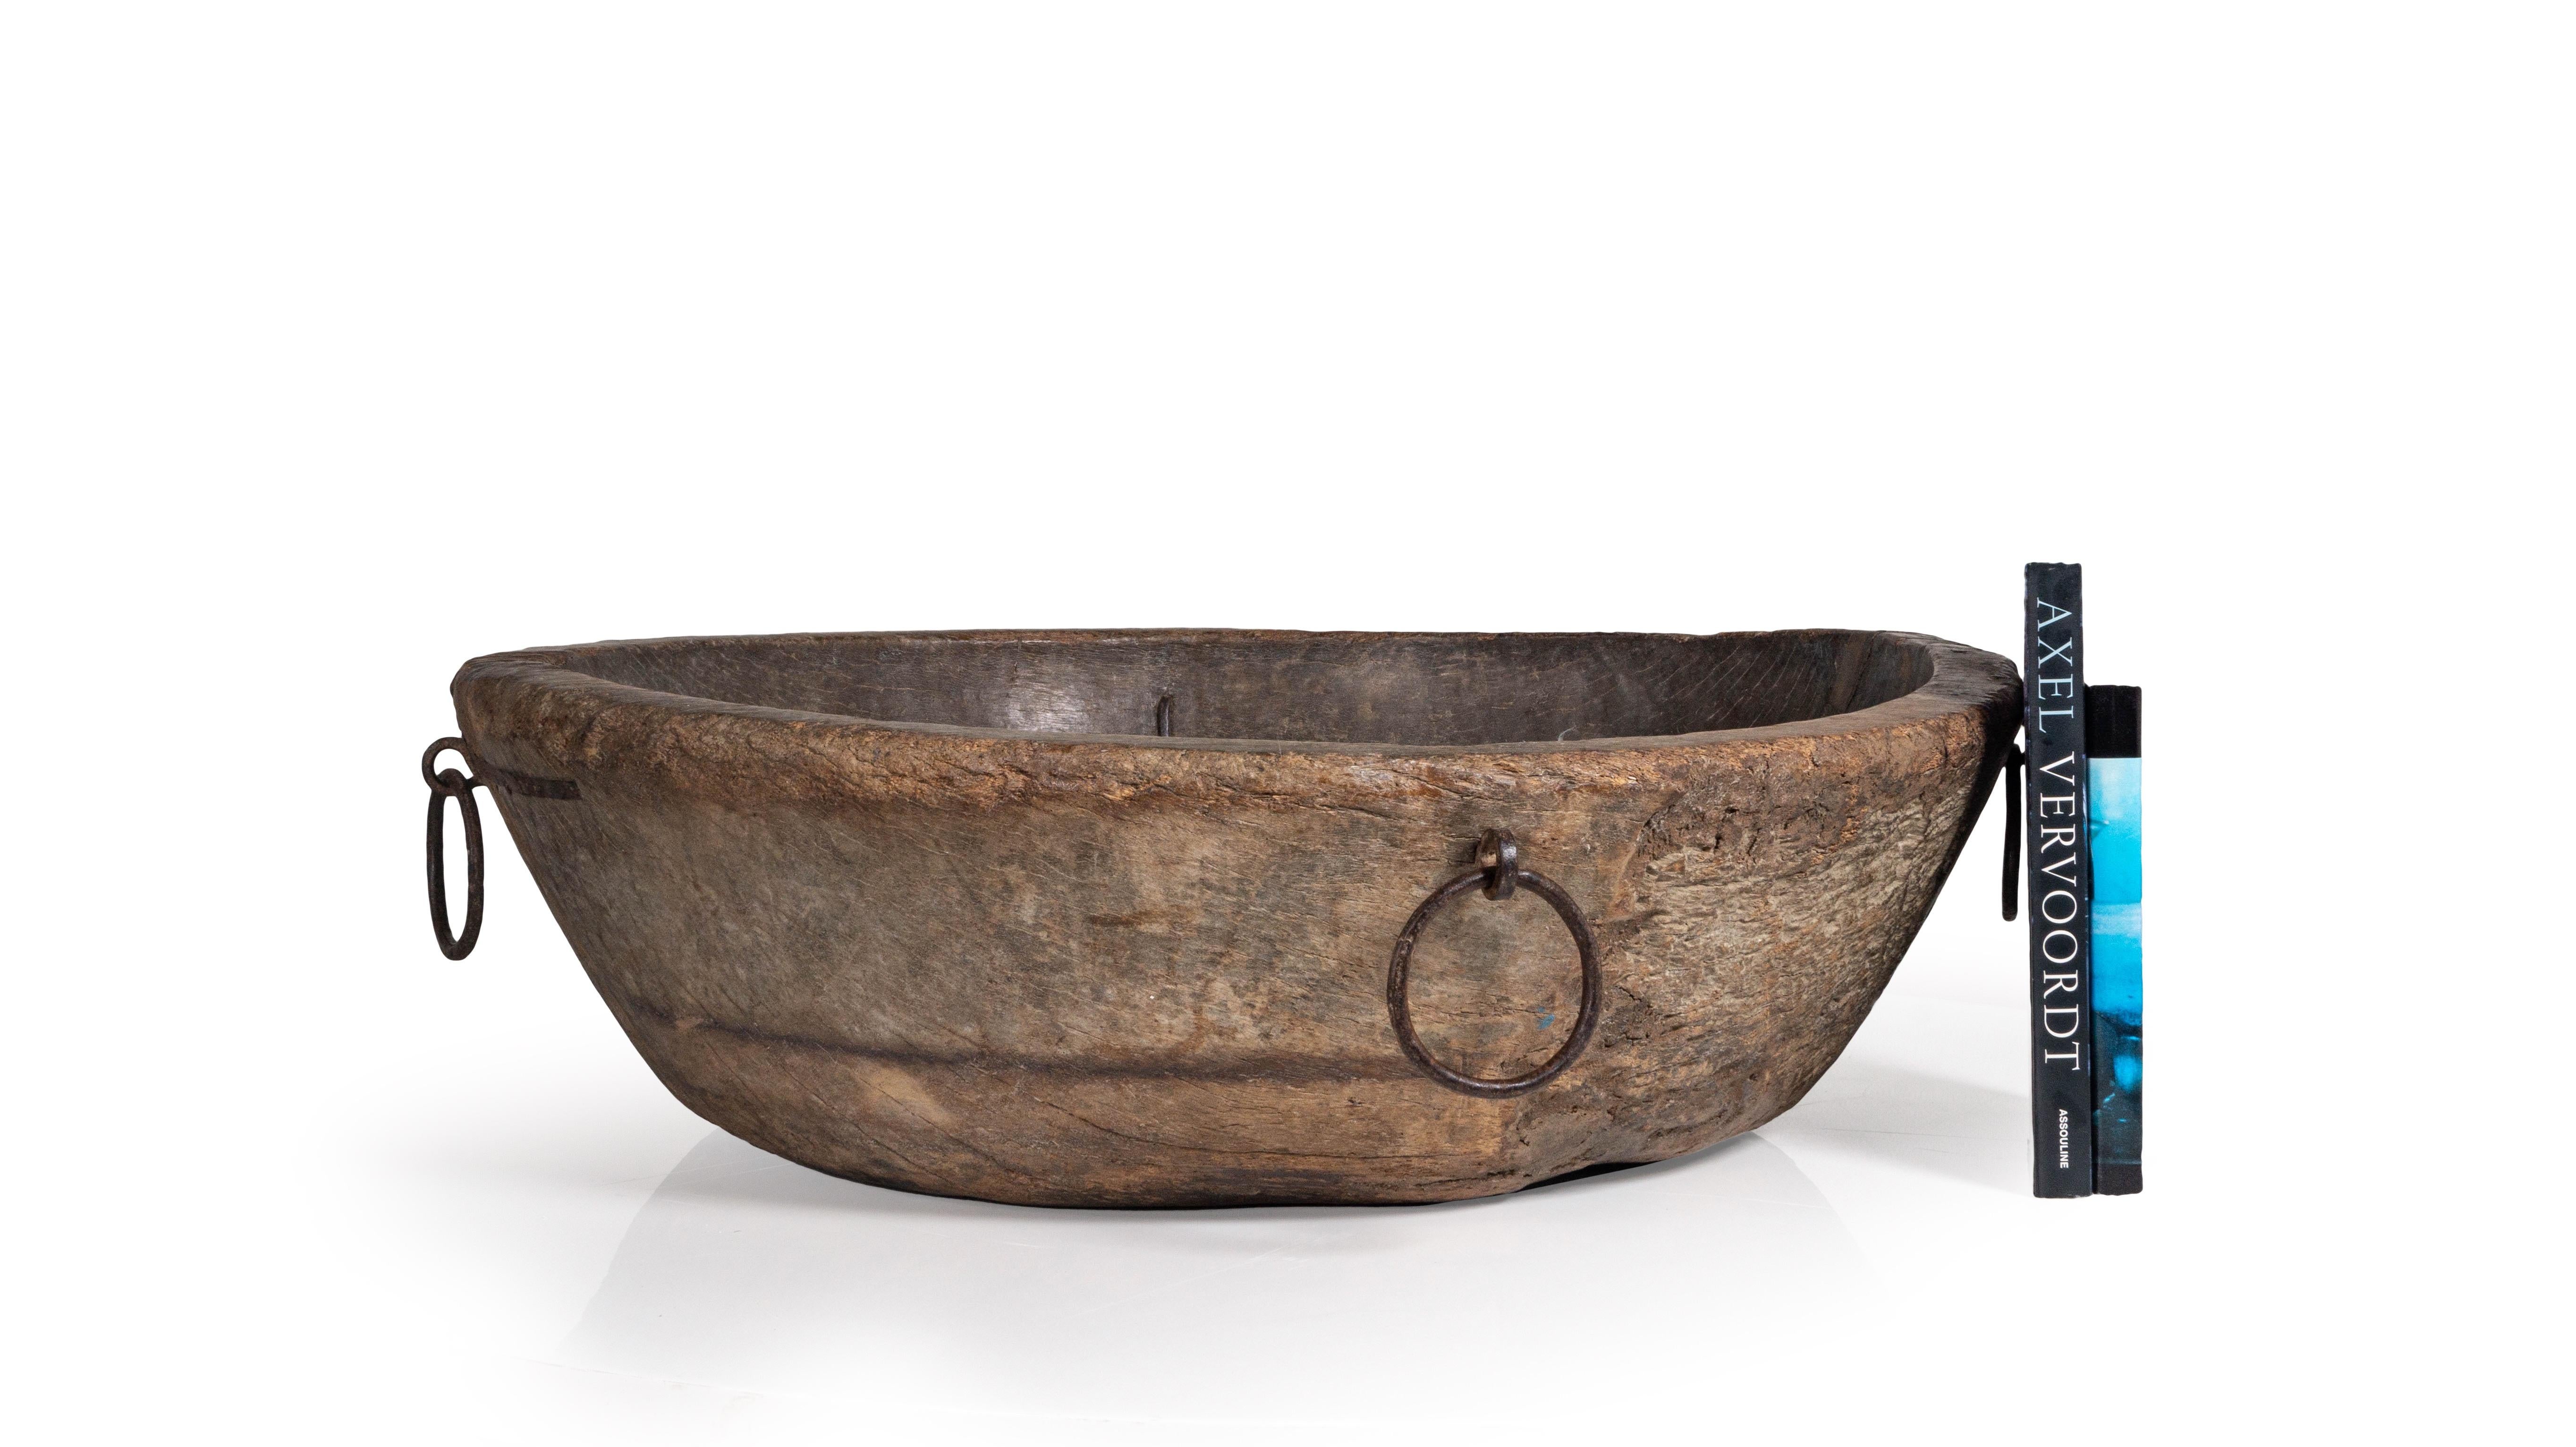 This large carved bowl with metal ring element handles is a part of our one of a kind collection, LeMonde, that is sourced from a small town in France. This beautiful bowl is carved from a single piece of wood adding to its uniqueness an its